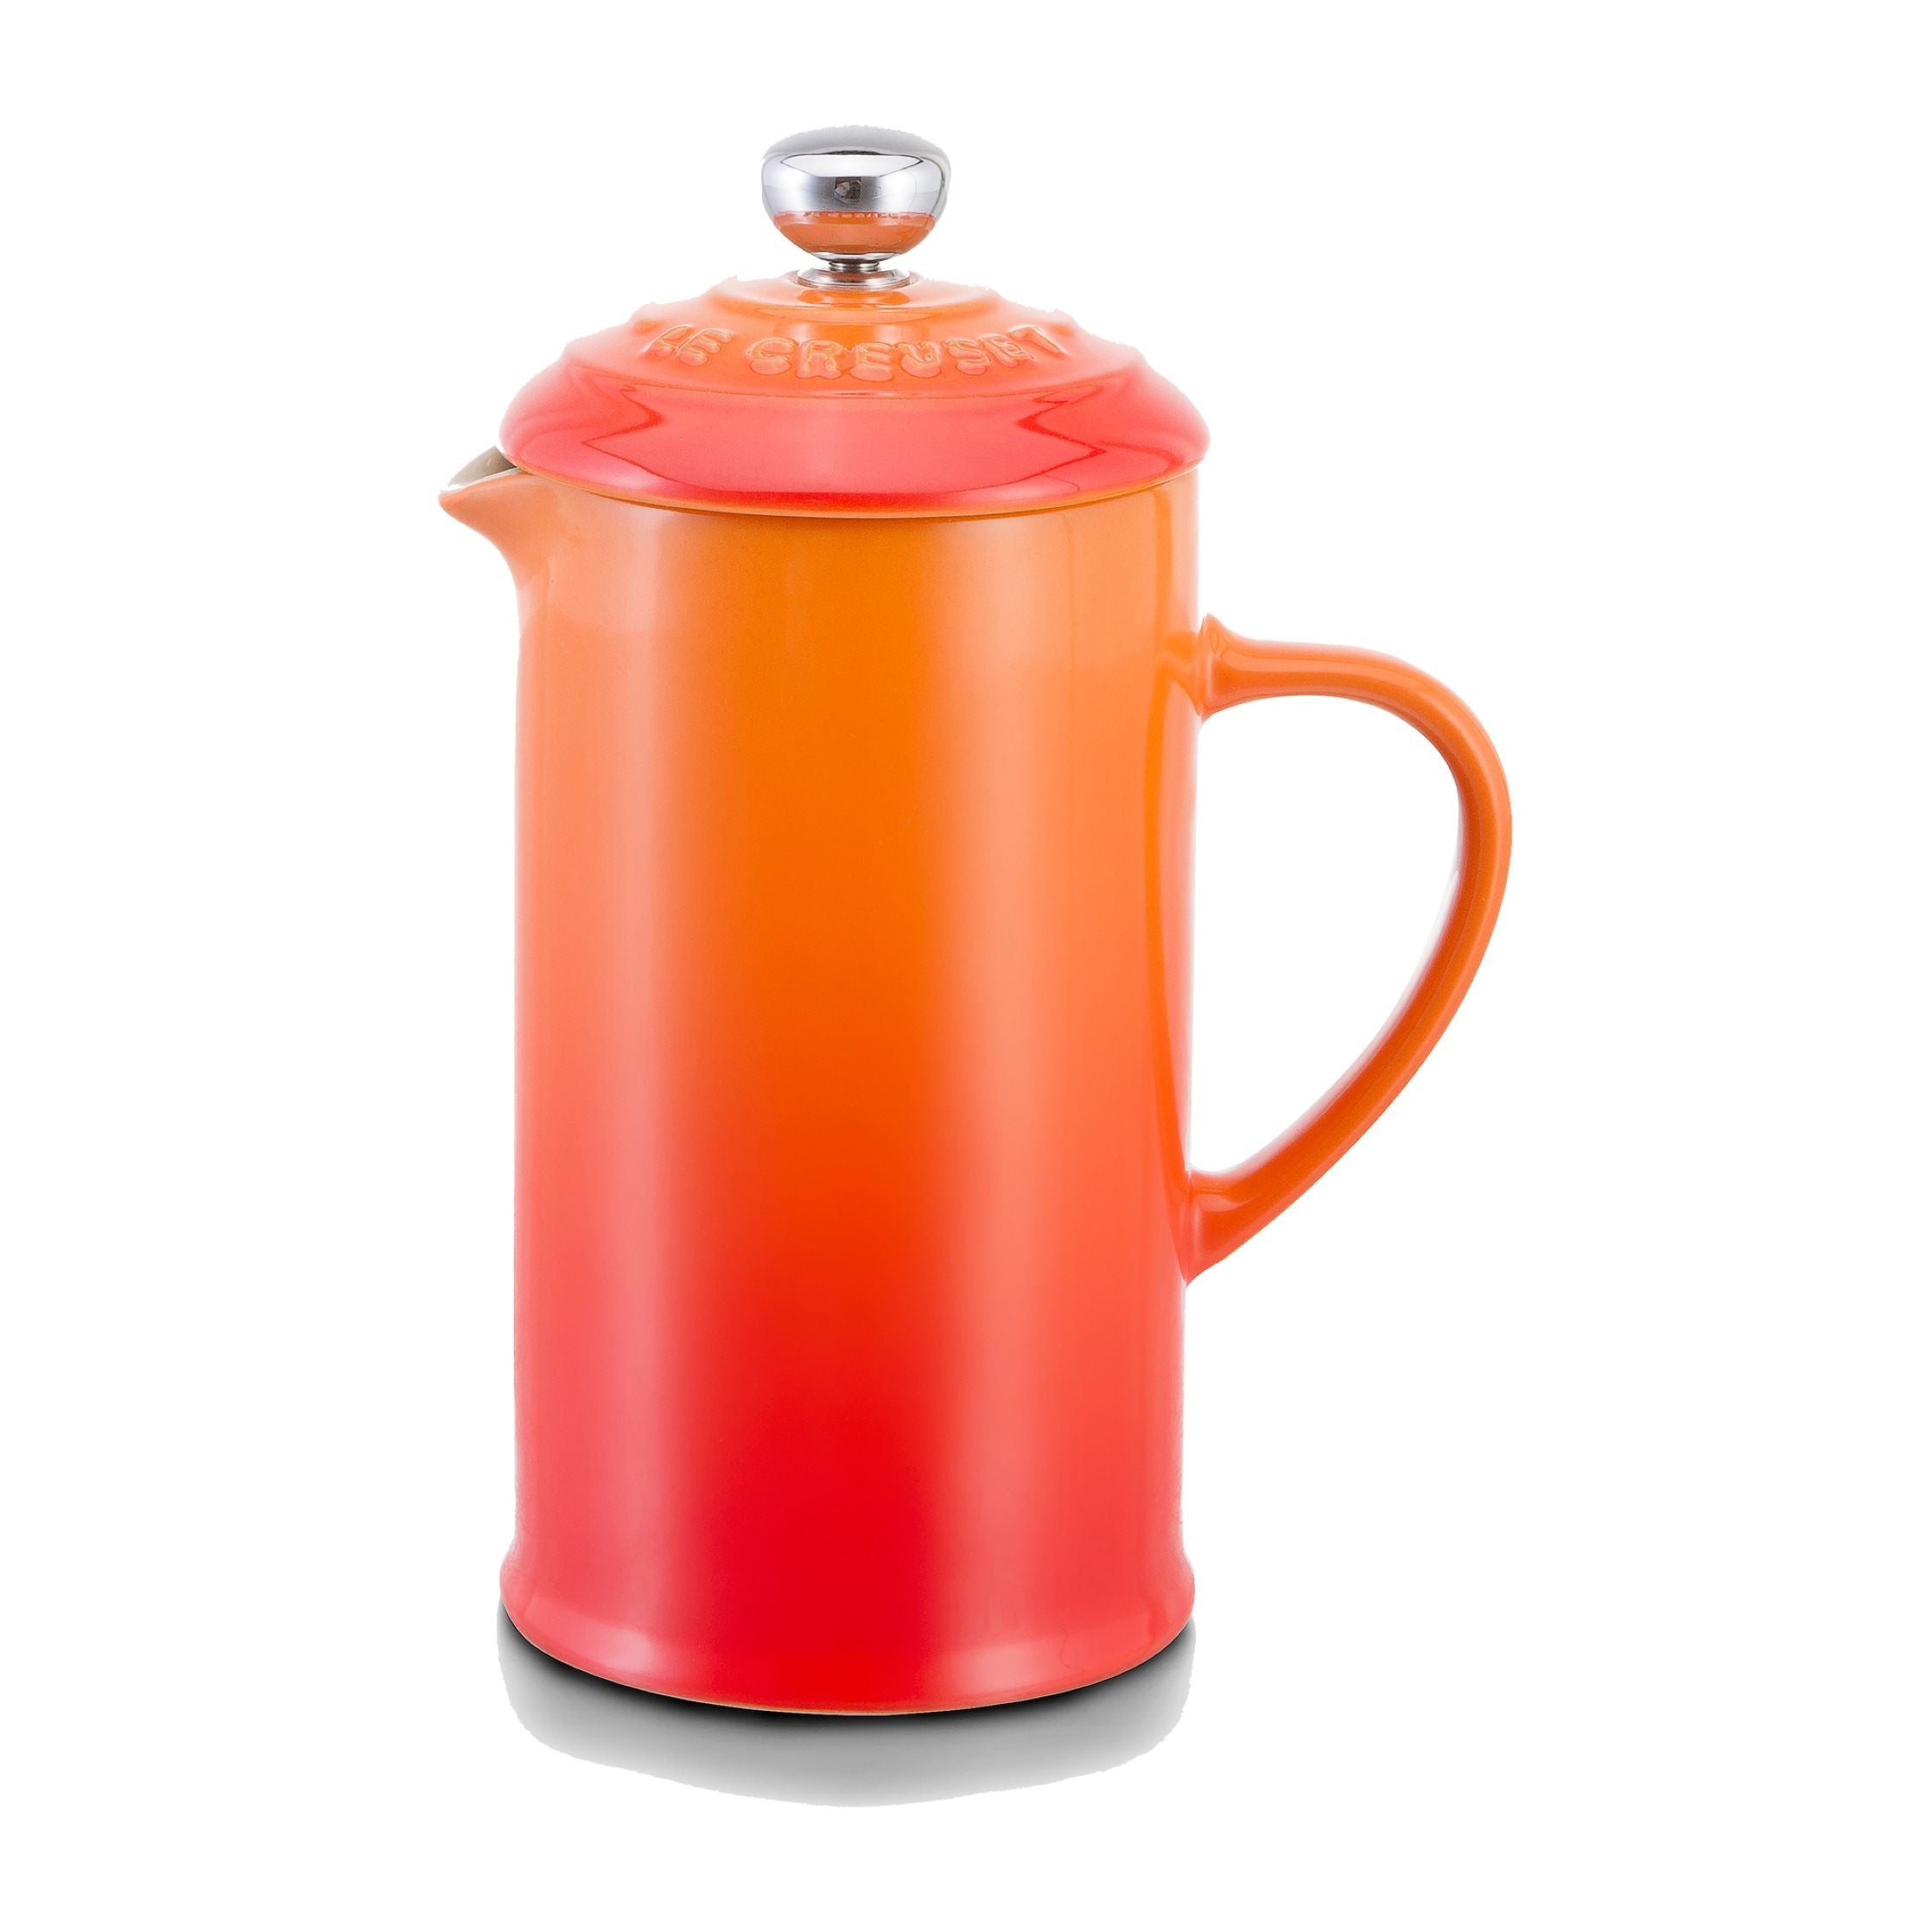 Le Creuset Coffee Maker 1 L, Oven Red